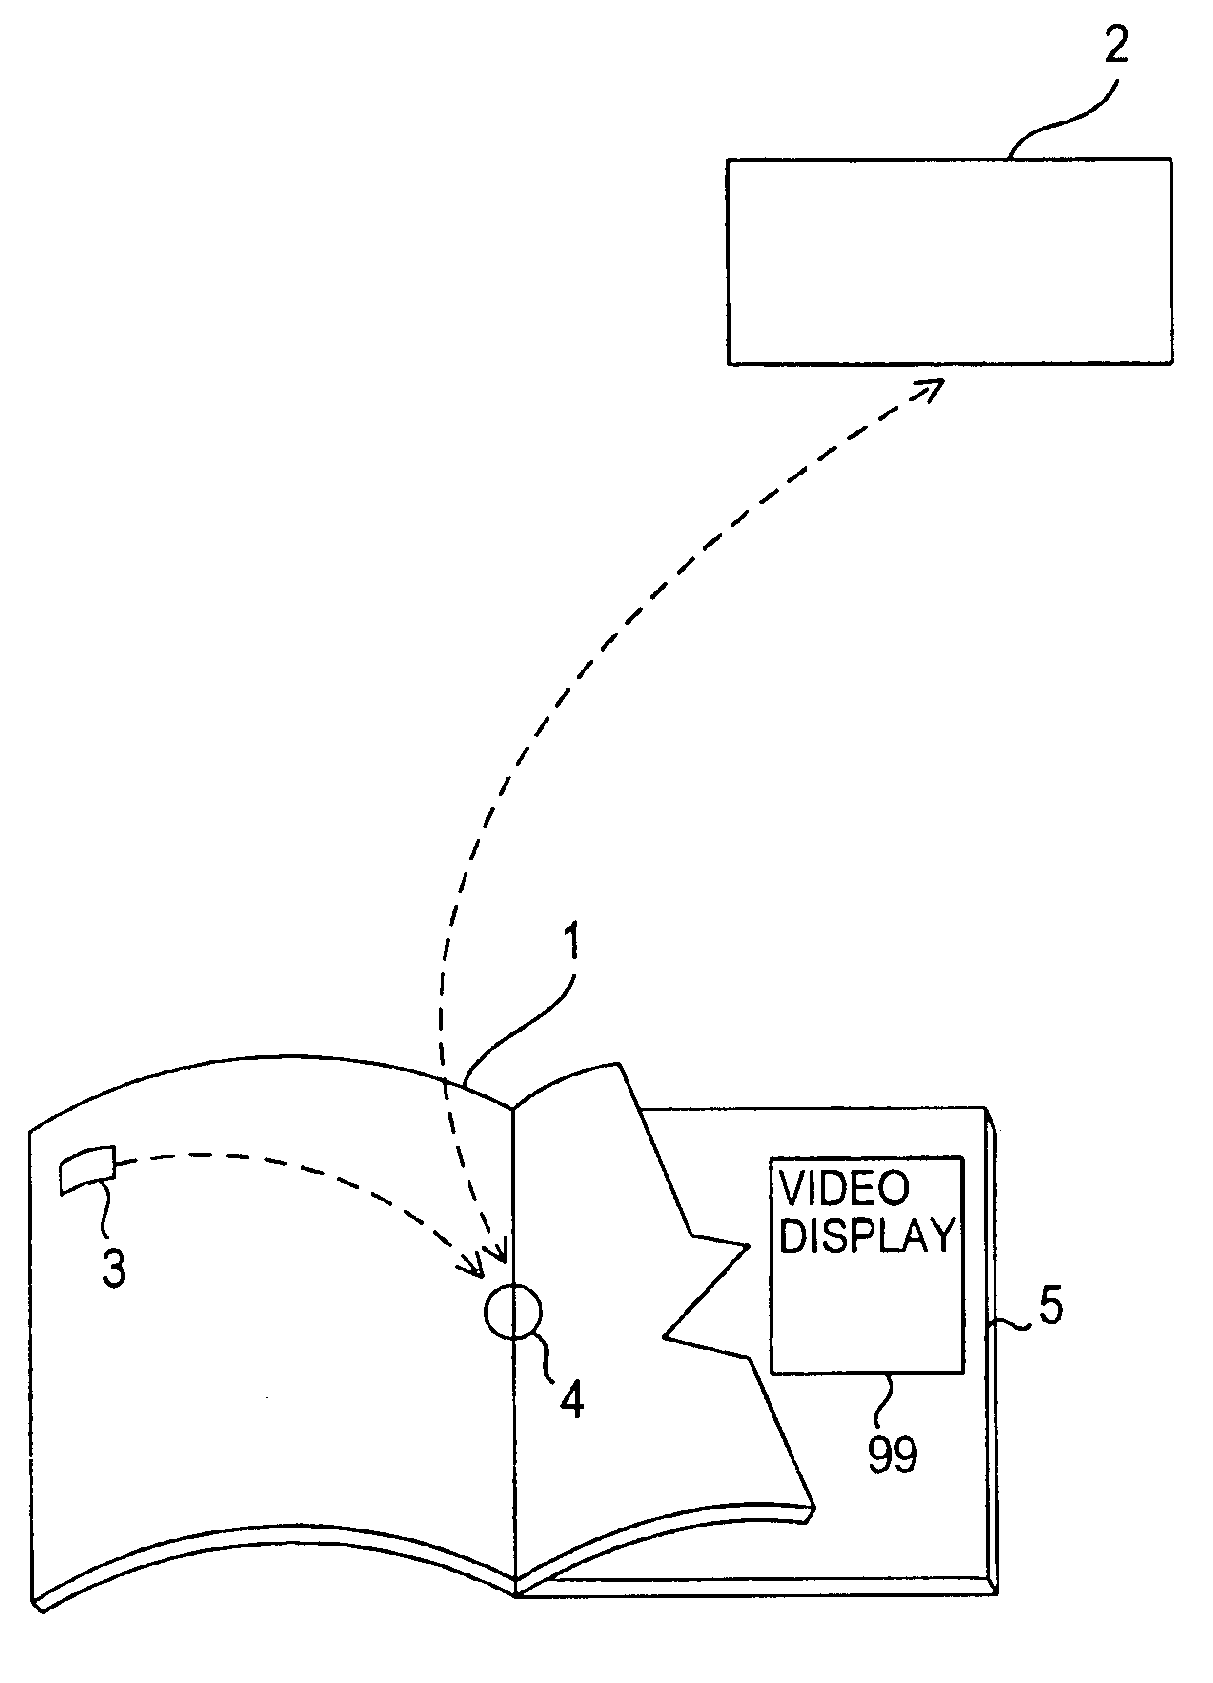 Method and apparatus for accessing electronic data via a familiar printed medium